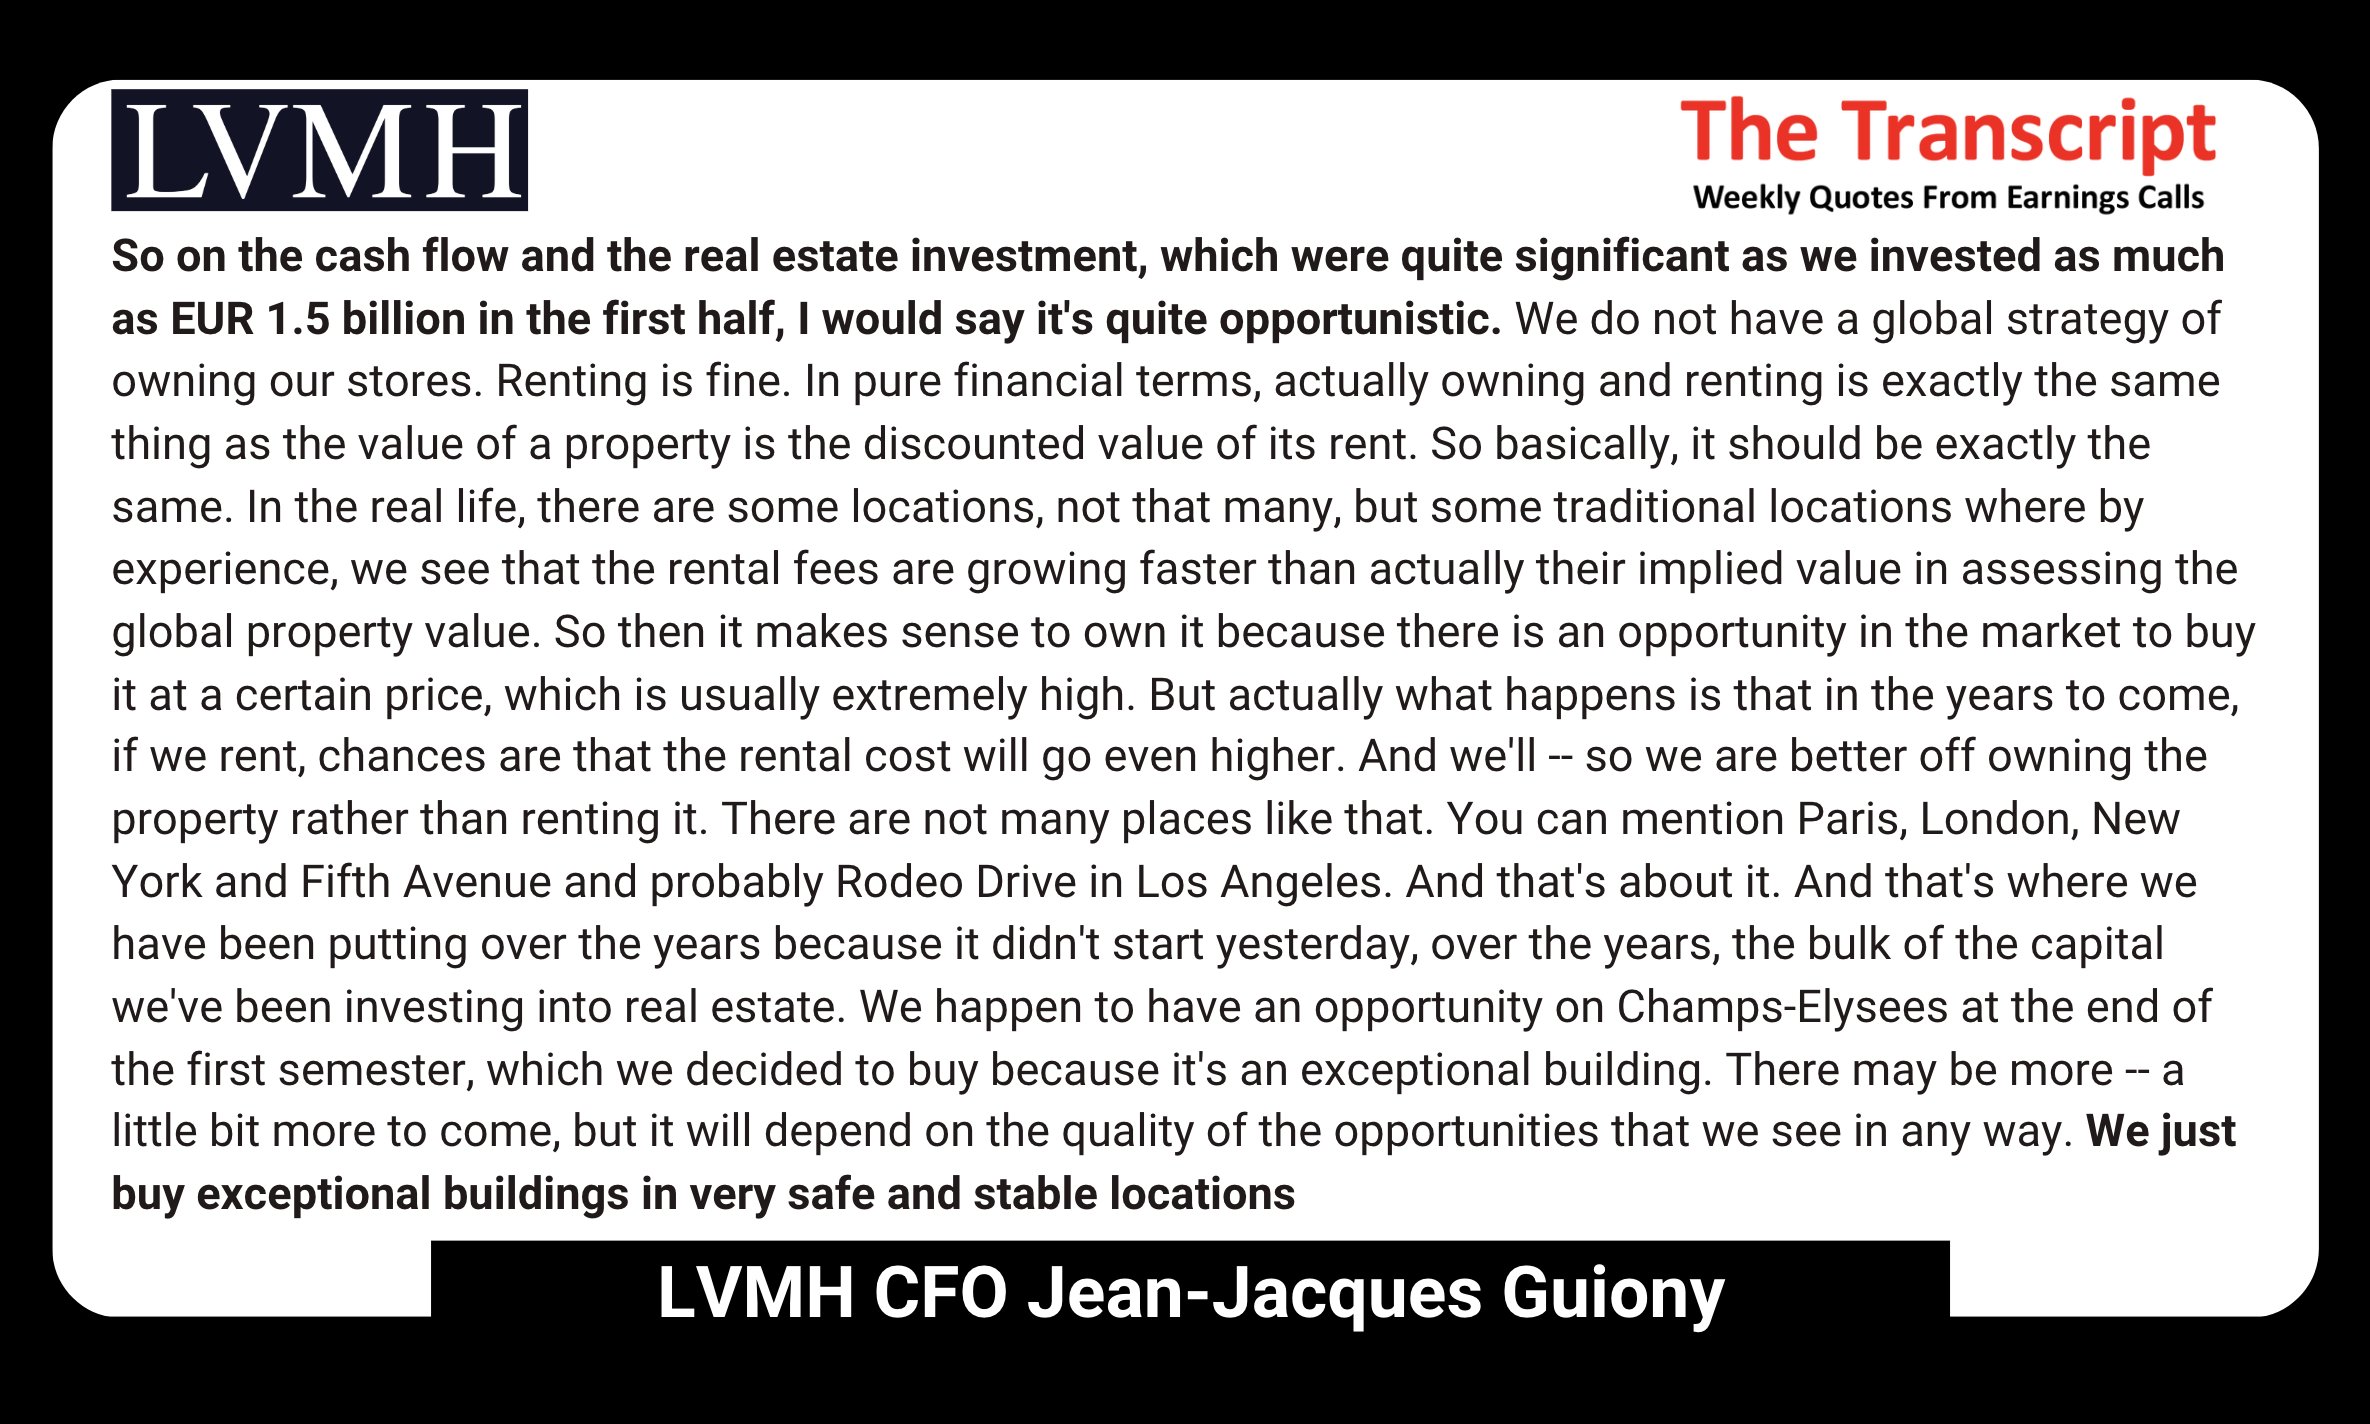 The Transcript on X: $LVMH CFO on investing in real estate: So on the CF  & the real estate investment, which were quite significant as we  invested as much as EUR 1.5